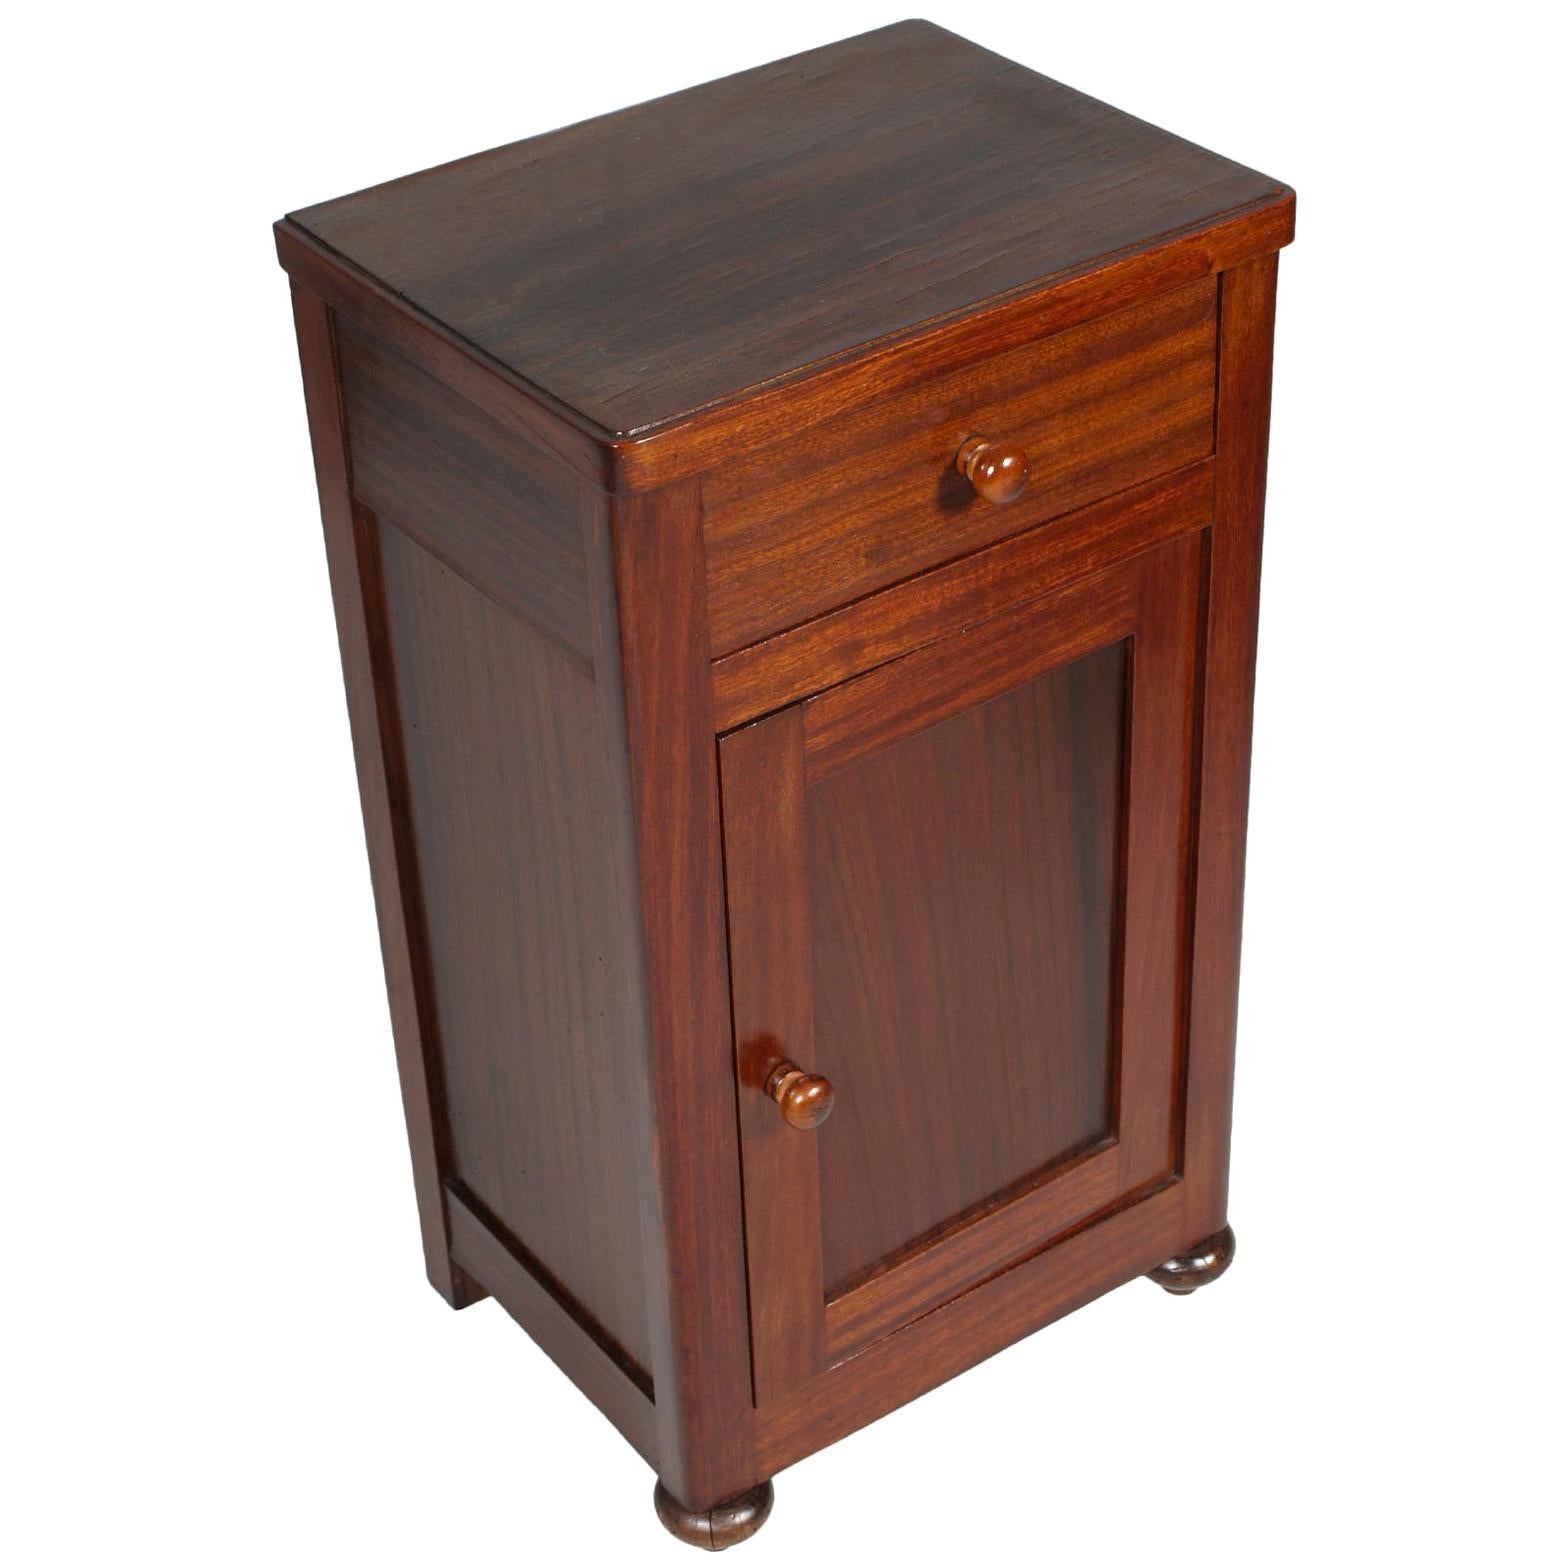 1900s Rustic Country Nightstand, Bedside Table, Walnut and Mahogany, Restored